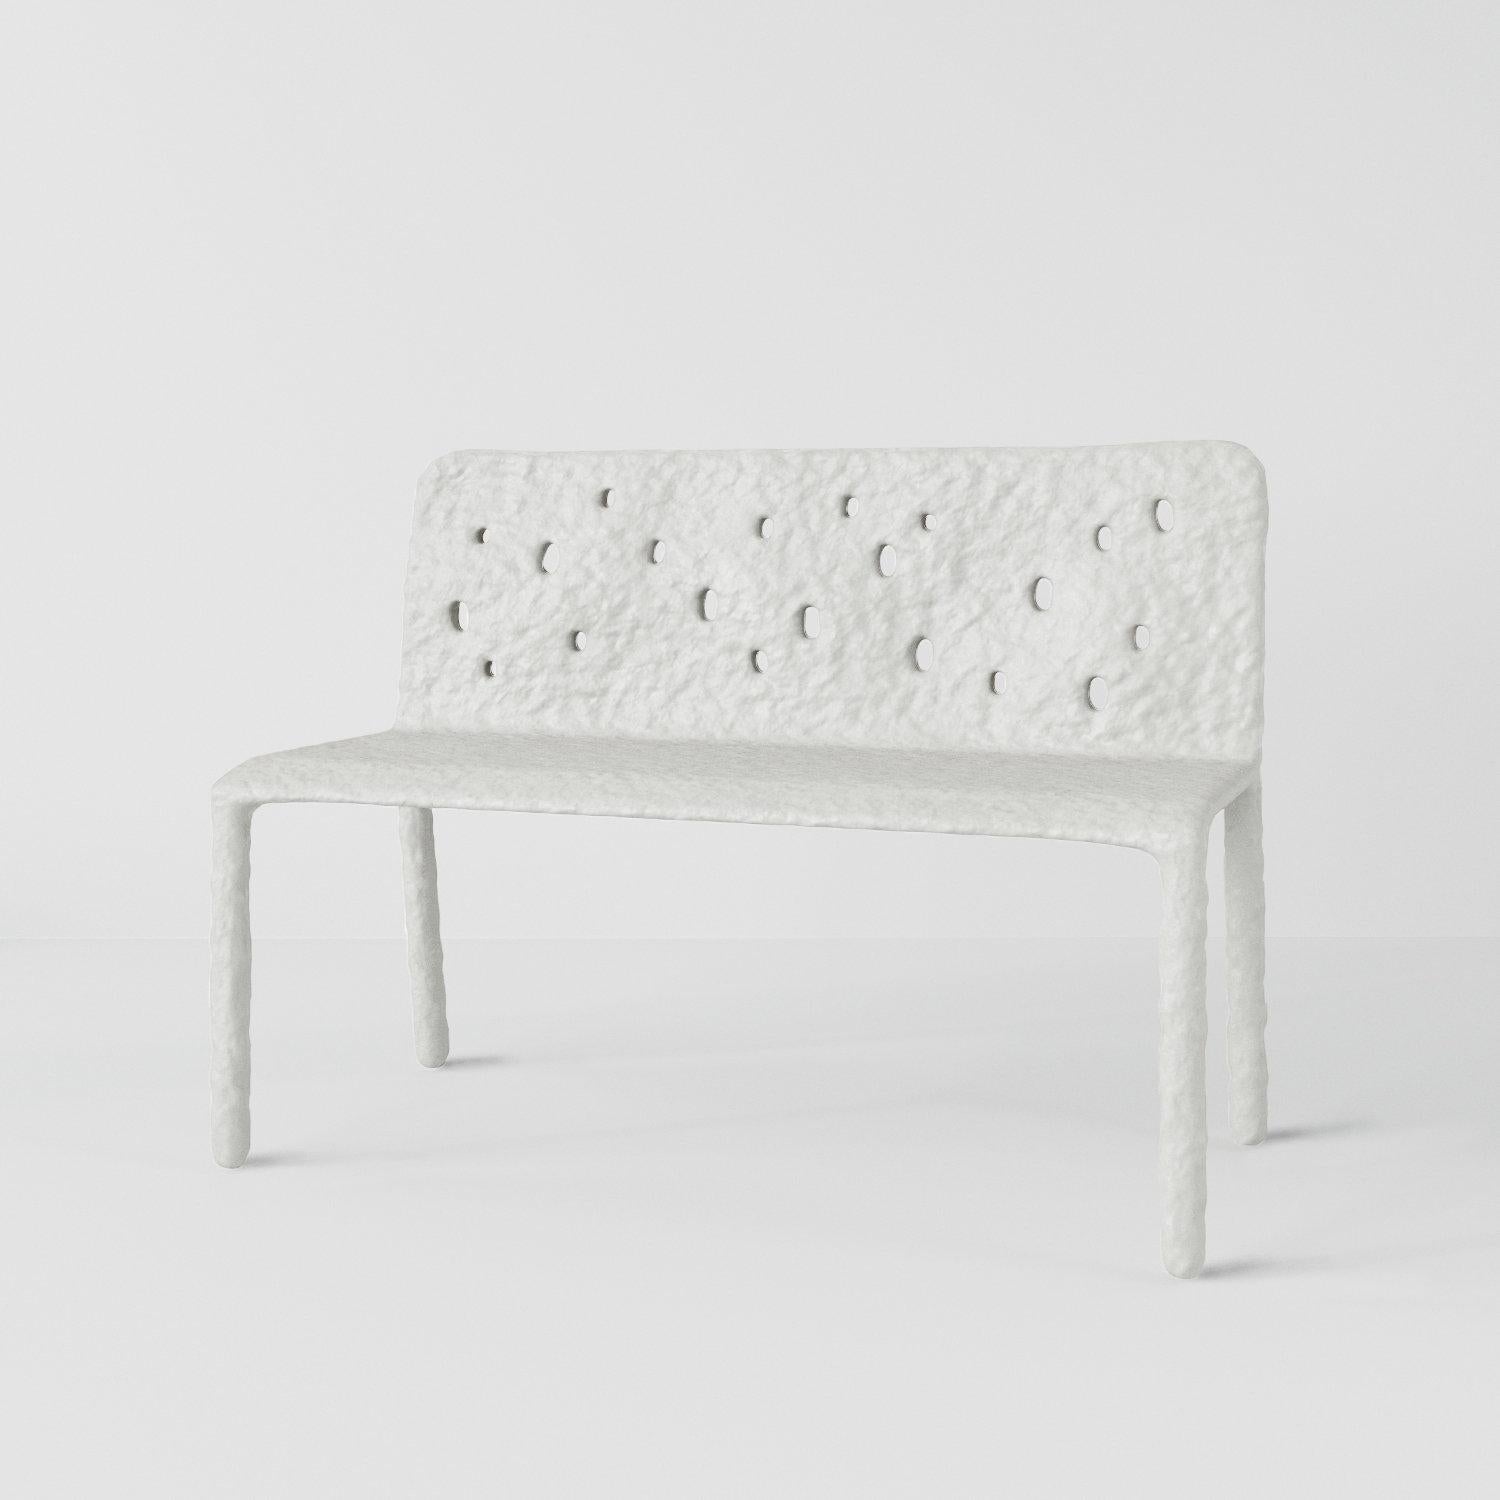 Outdoor sculpted contemporary bench by FAINA
Design: Victoriya Yakusha
Material: steel, flax rubber, biopolymer, cellulose
Dimensions: Length 110 x height 82 x width 52.5 cm, seat height: 45cm
Weight: 25 kilos.

Available in 12 colours

Made